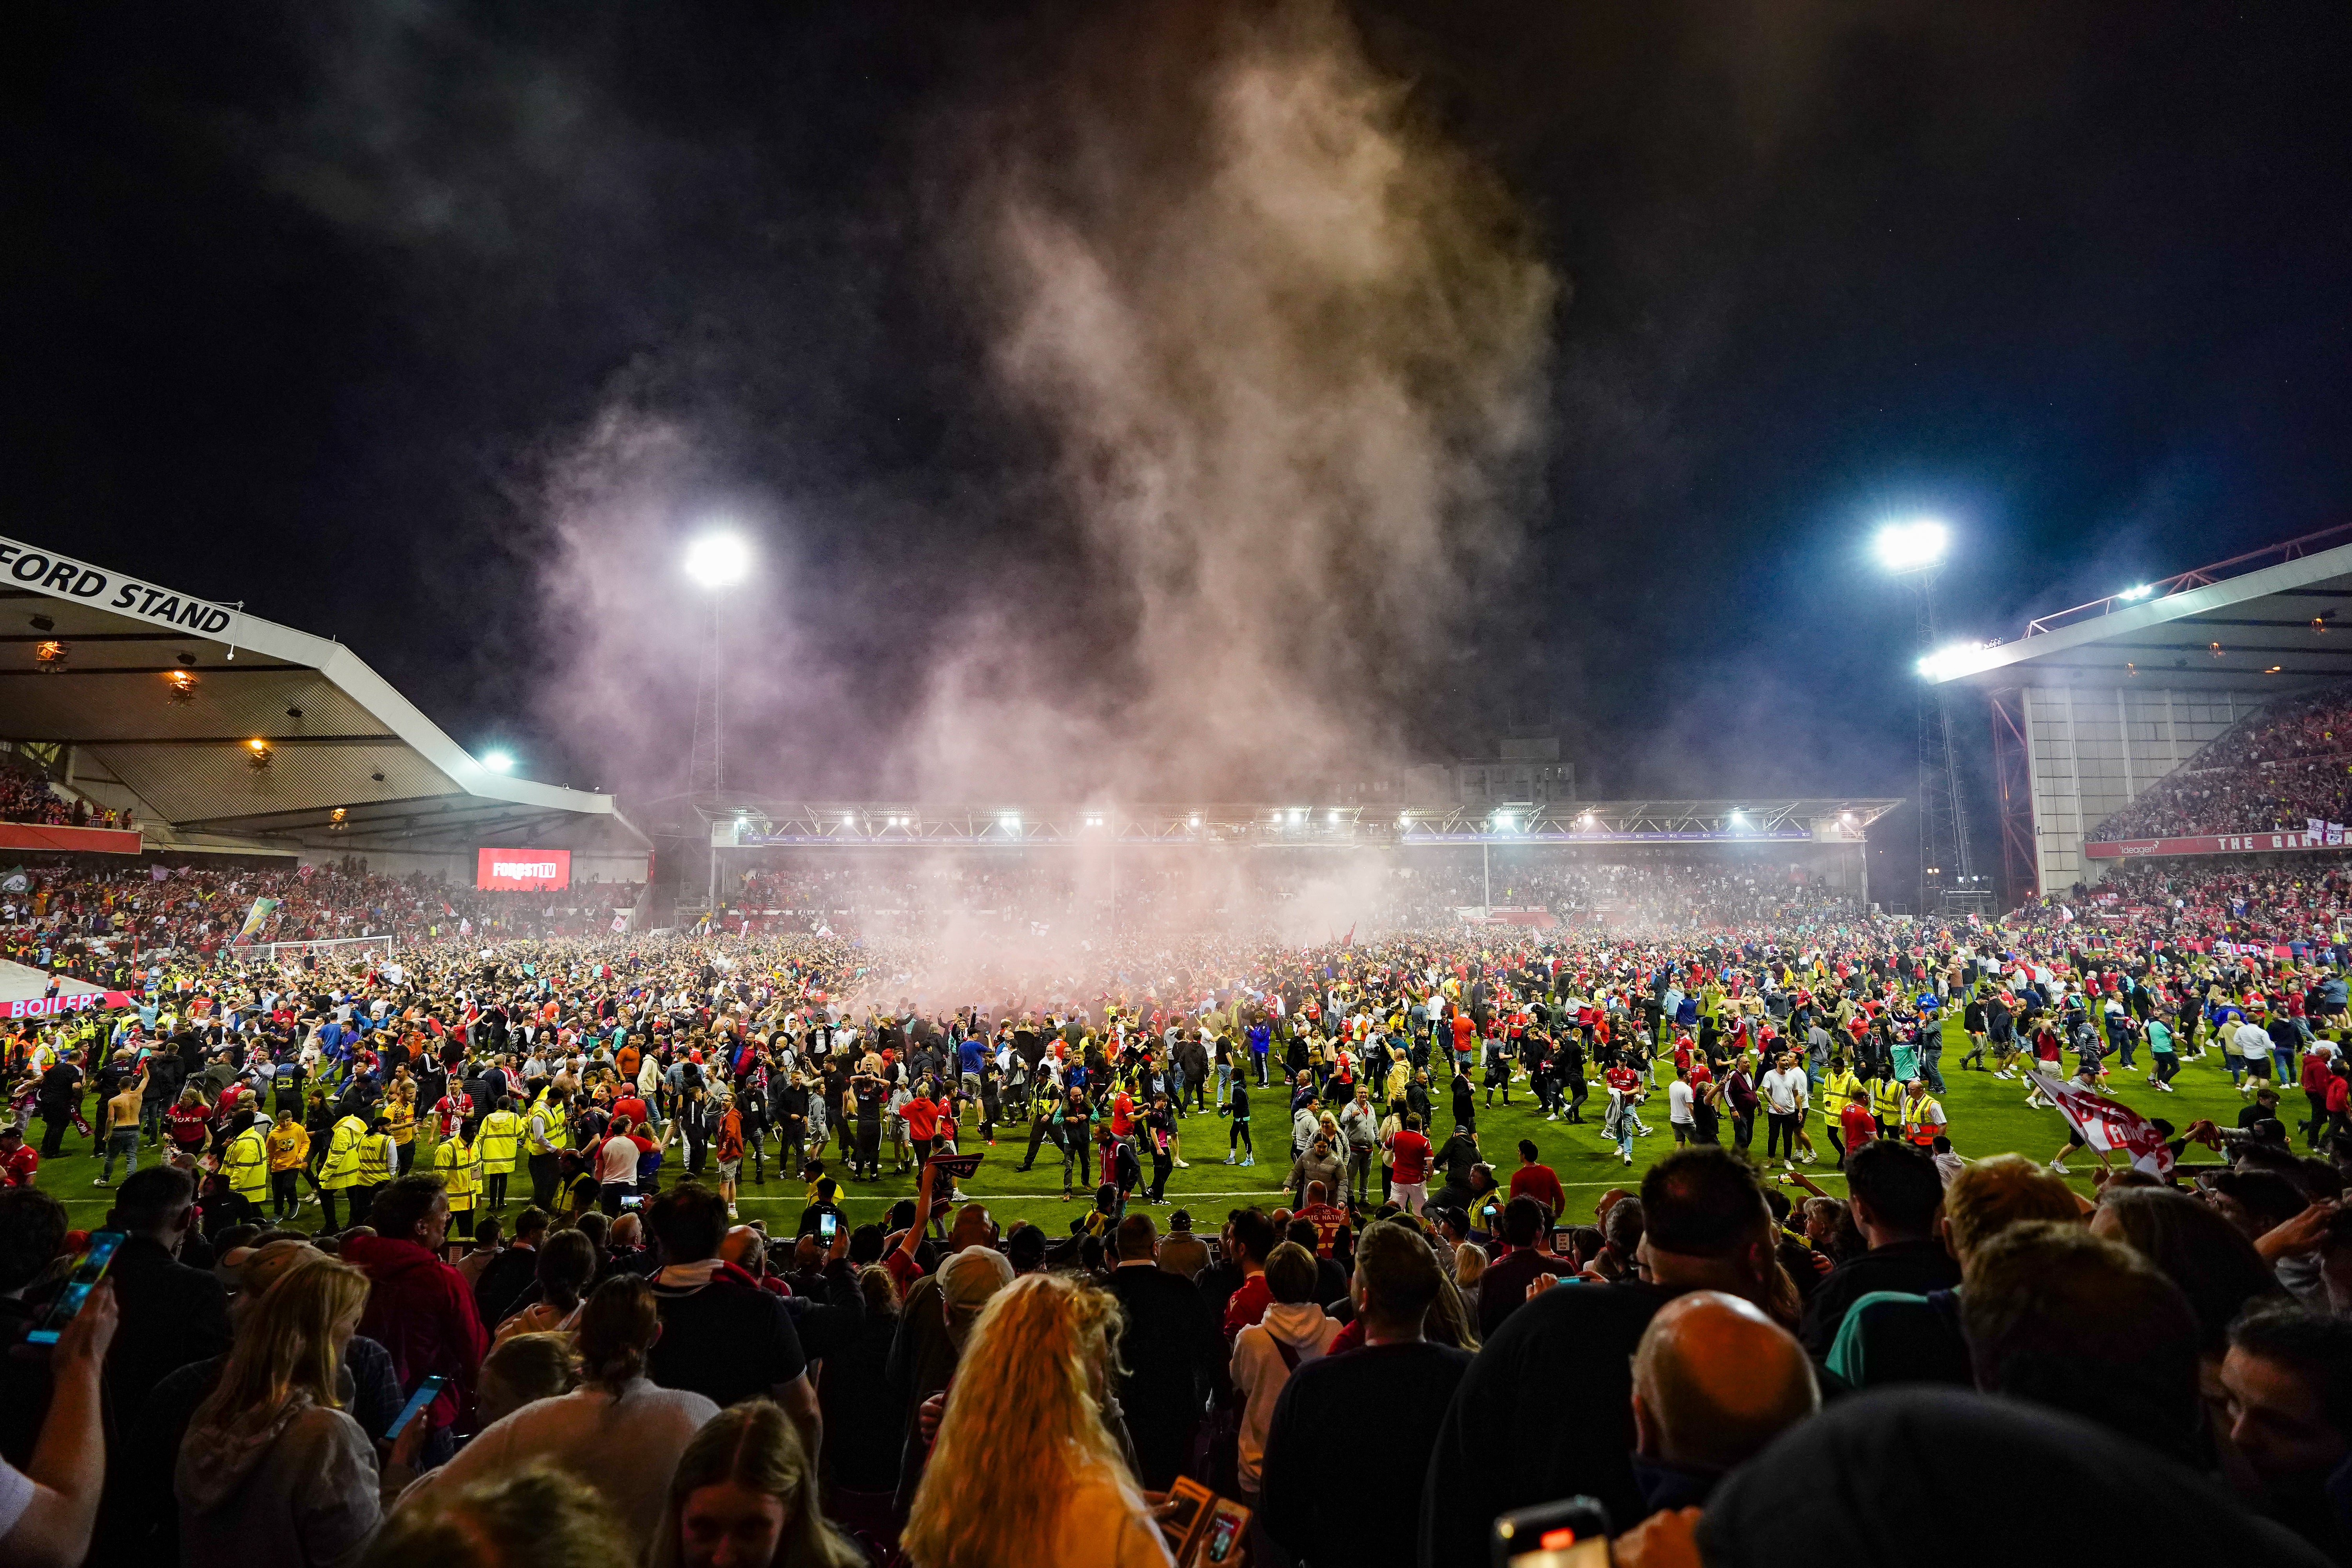 Nottingham Forest fans celebrate on the pitch after they reach the play-off final (Zac Goodwin/PA)